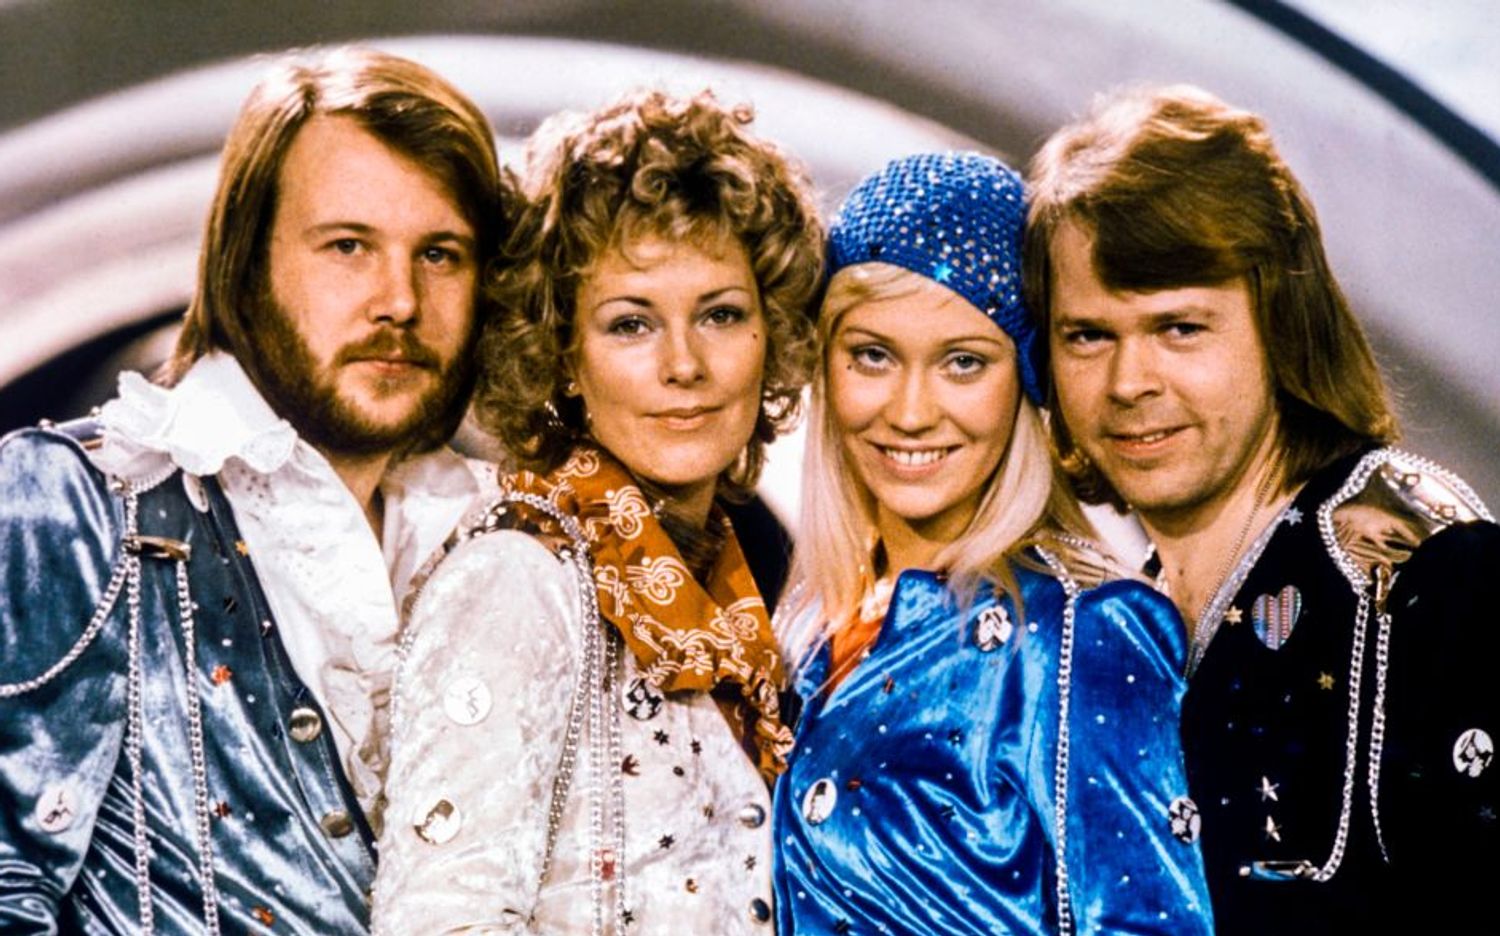 ABBA band photo during Eurovision Song contest